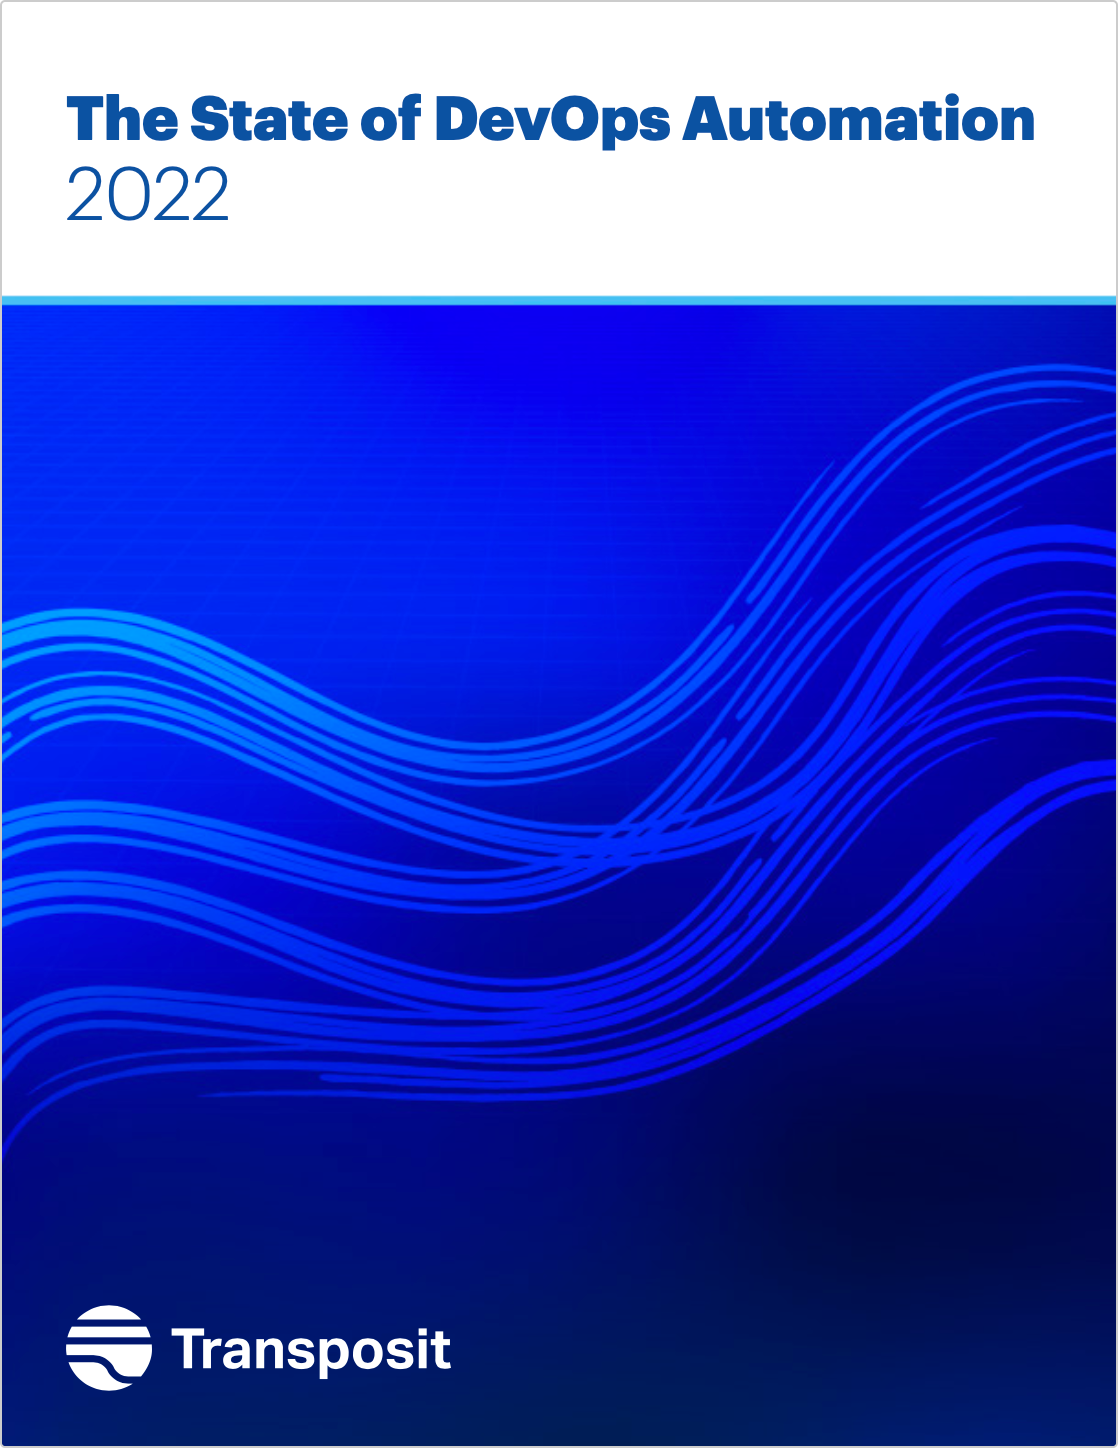 The State of DevOps Automation 2022 Report Transposit